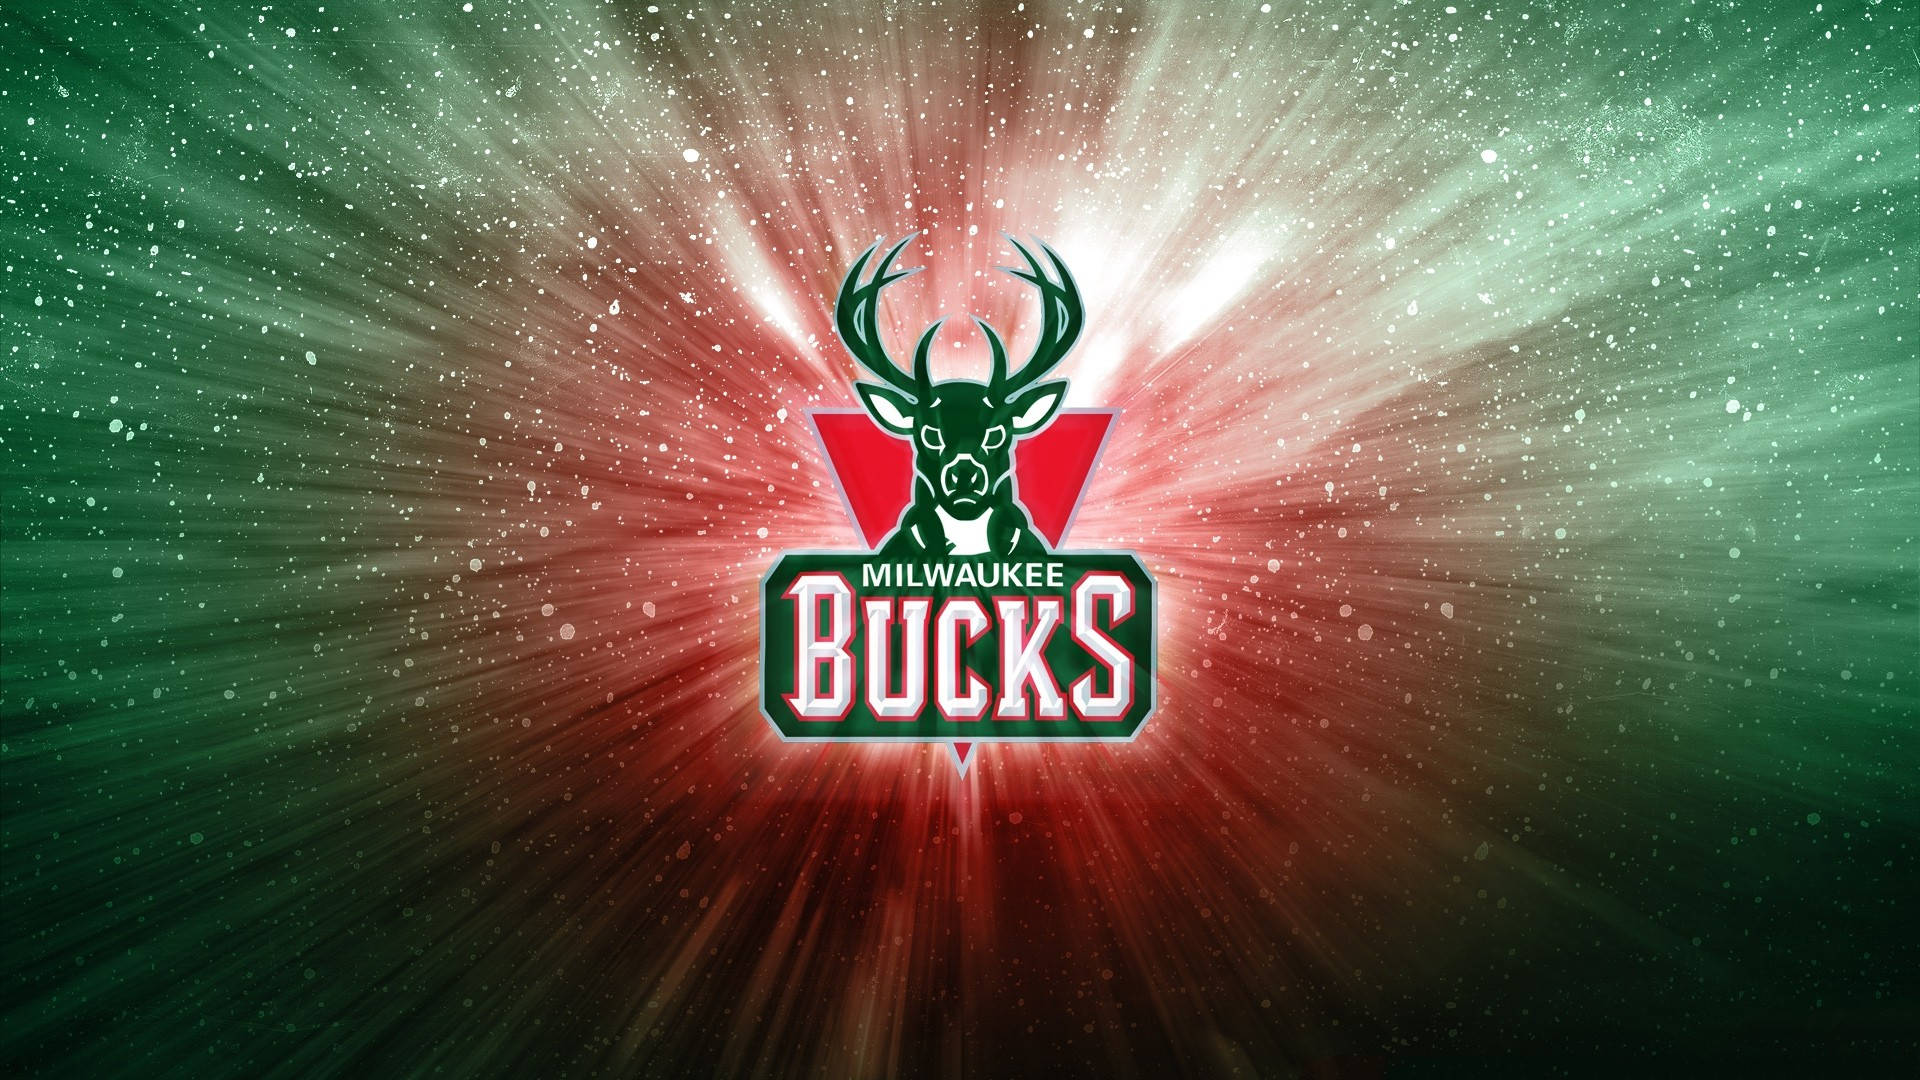 Milwaukee Bucks In Green And Red Wallpaper